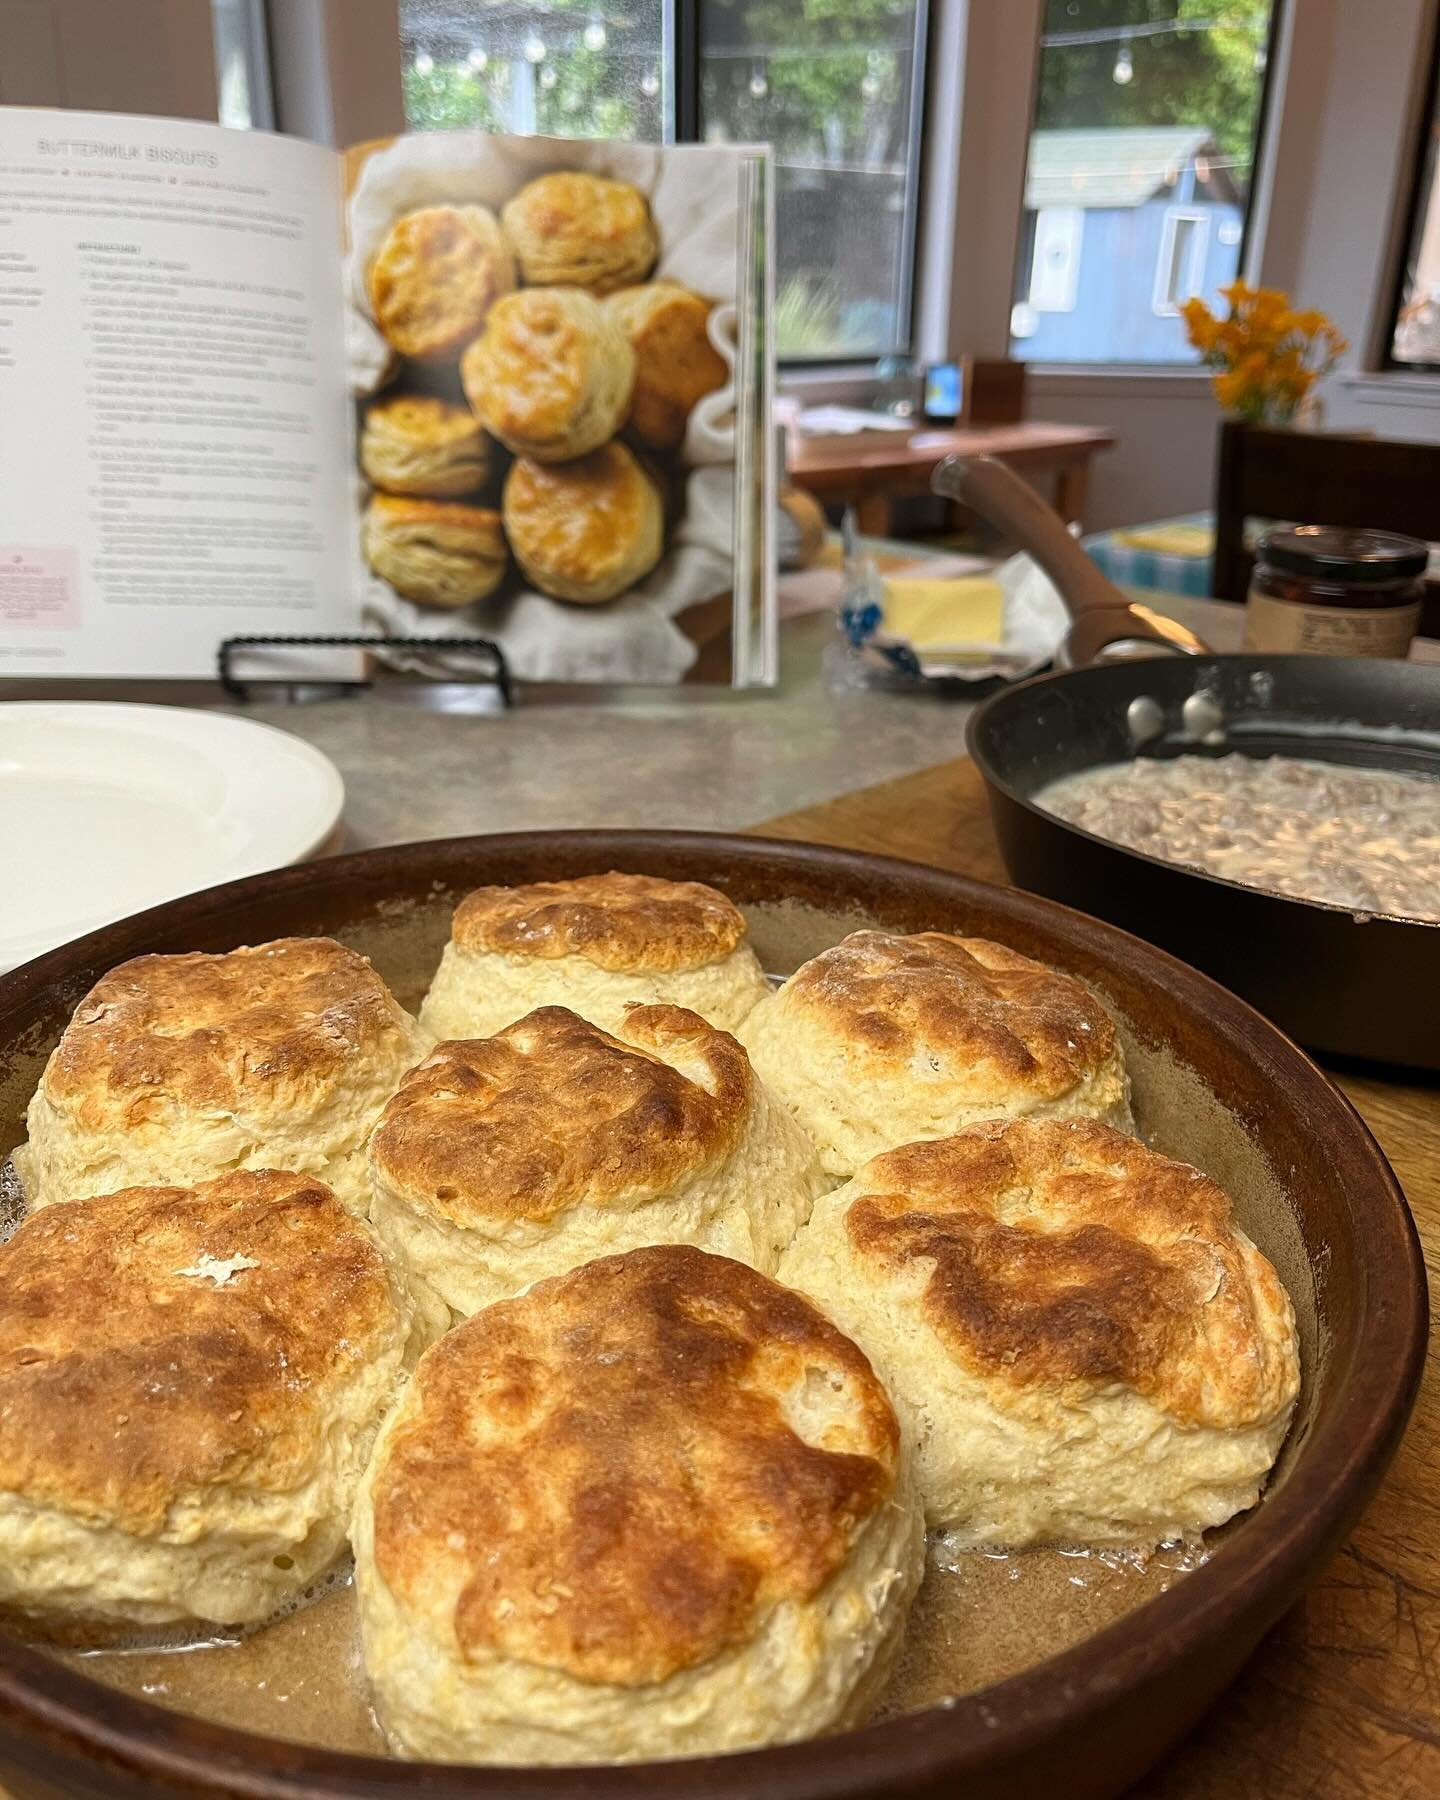 🎶&rdquo;When the weather outside is frightful&hellip;&rdquo;🎶

Oh wait&hellip;it is not winter? Just April showers?

Well anyway, it was the &ldquo;perfect&rdquo; weather for homemade buttermilk biscuits and sausage gravy for dinner 😋 #aprilshower